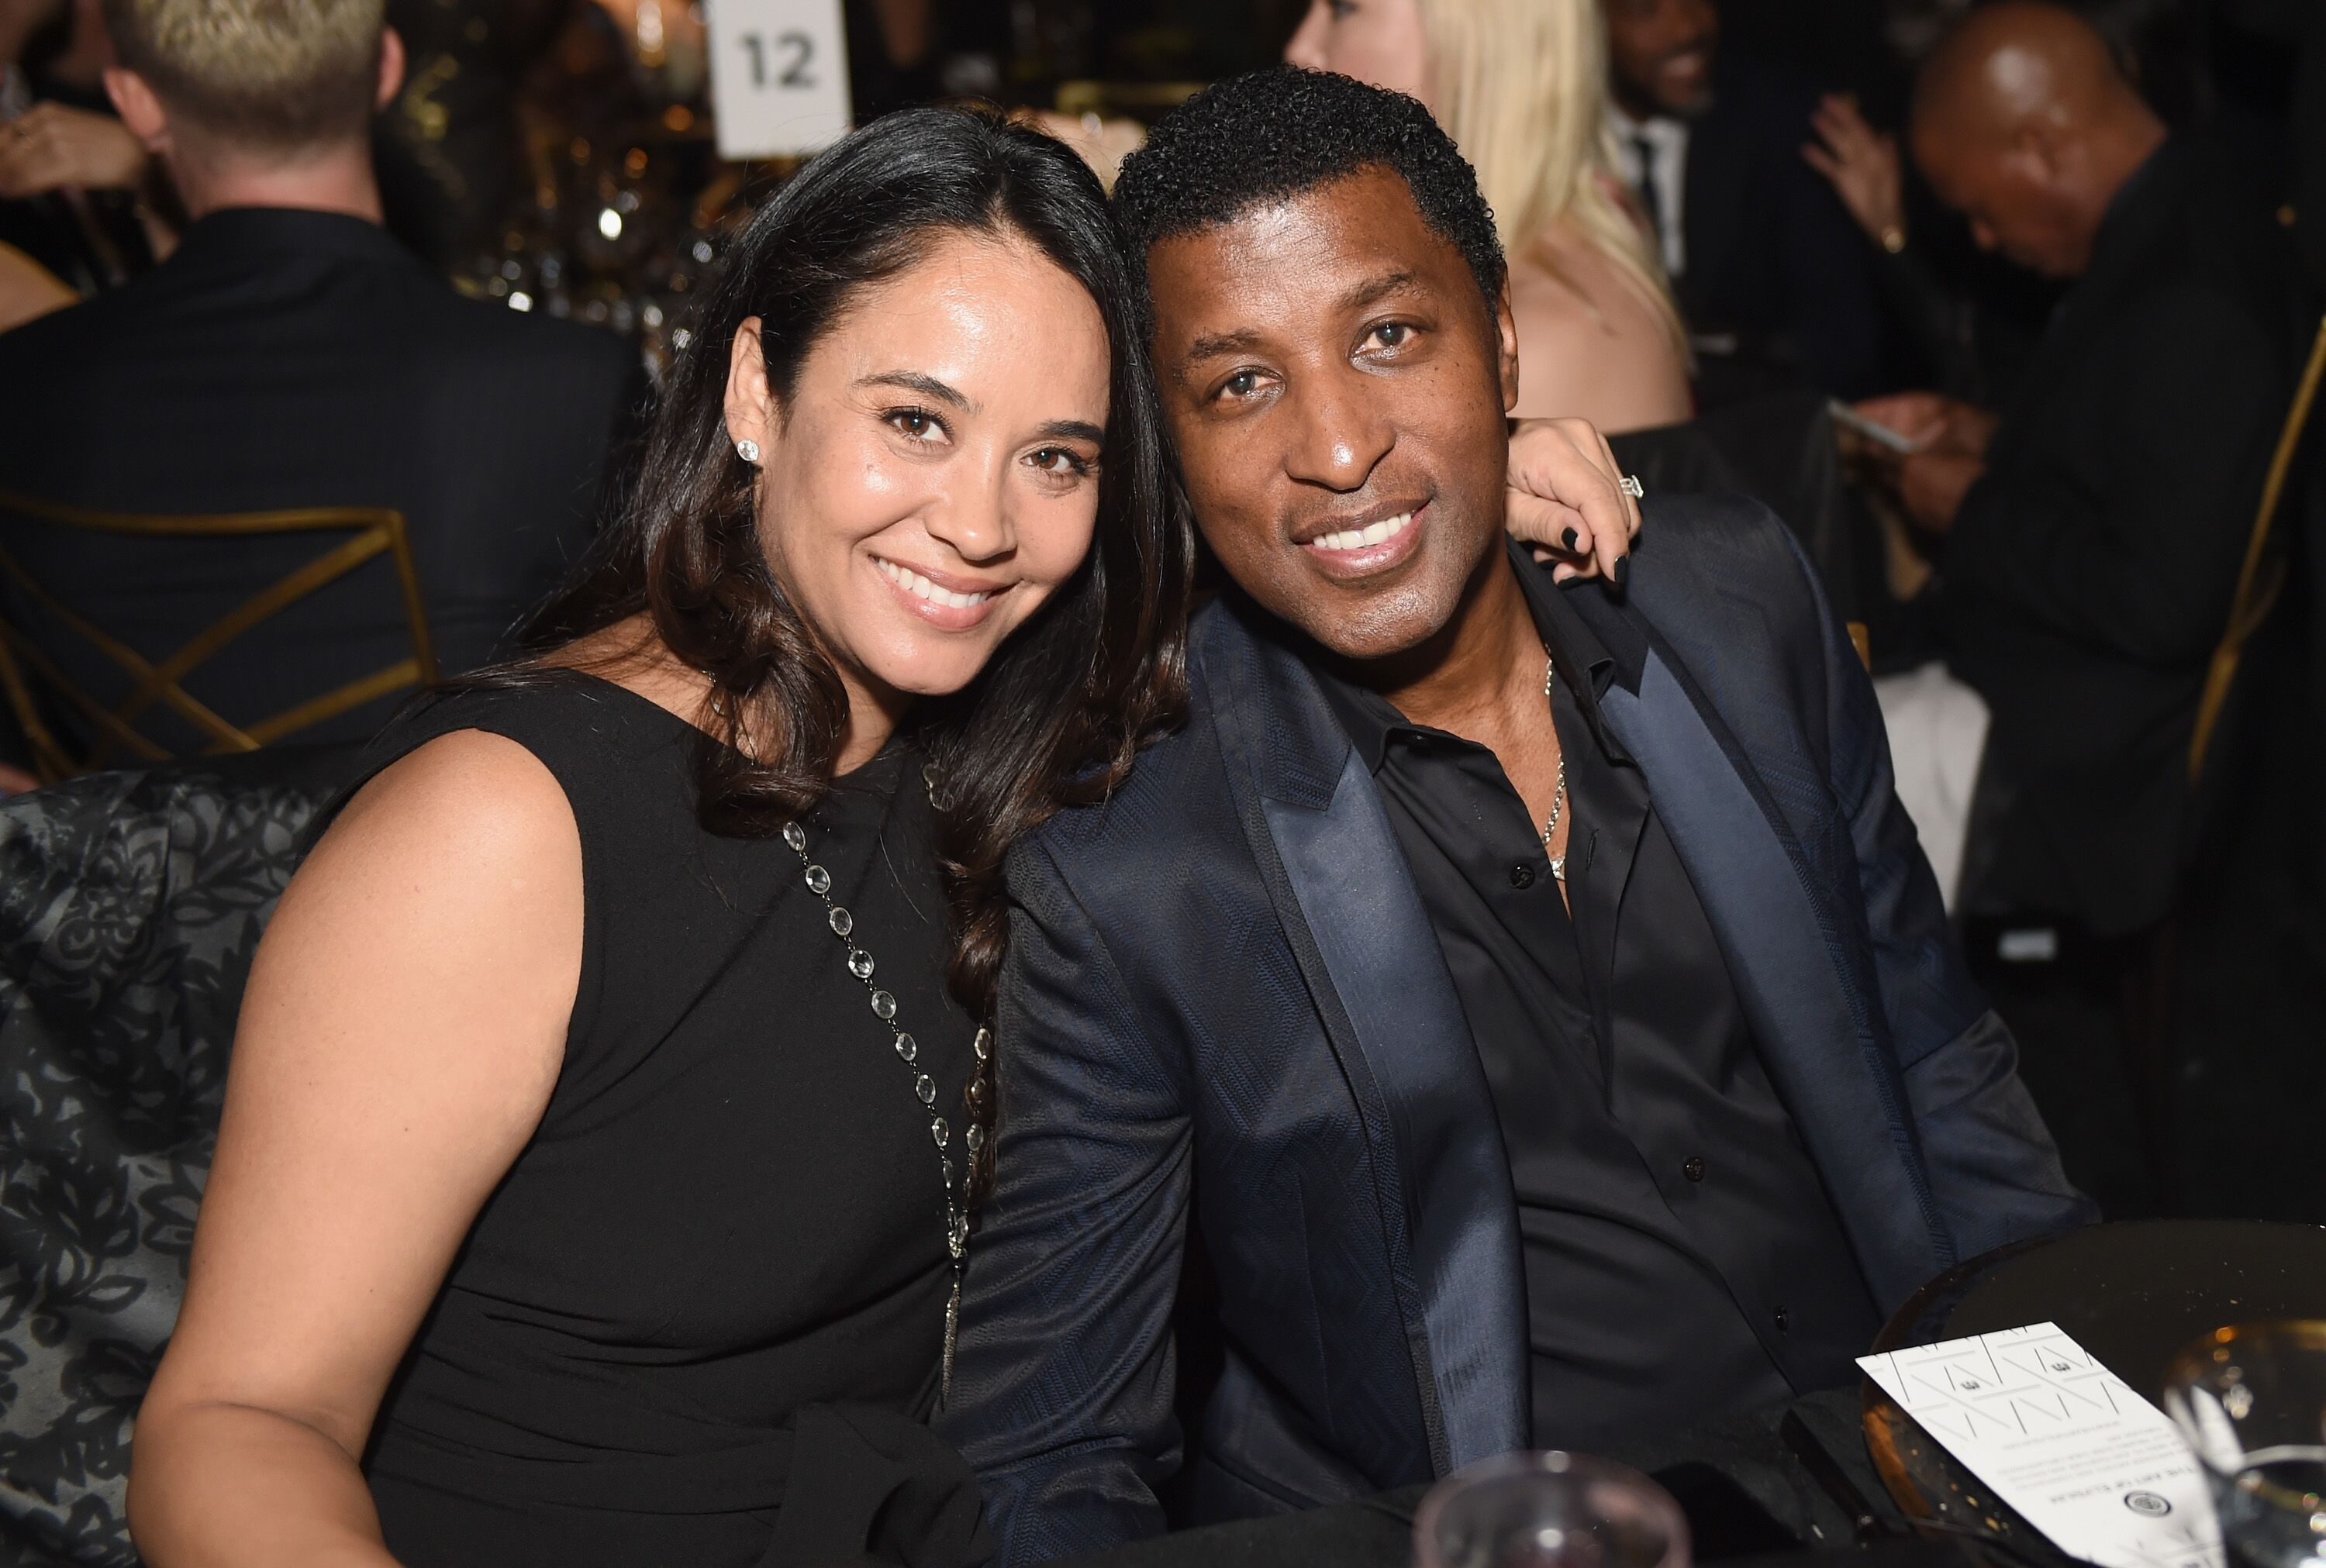 Nicole Pantenburg and Kenneth 'Babyface' Edmonds attend The Art of Elysium presents Stevie Wonder's HEAVEN - Celebrating the 10th Anniversary at Red Studios on January 7, 2017 in Los Angeles, California.| Source: Getty Images